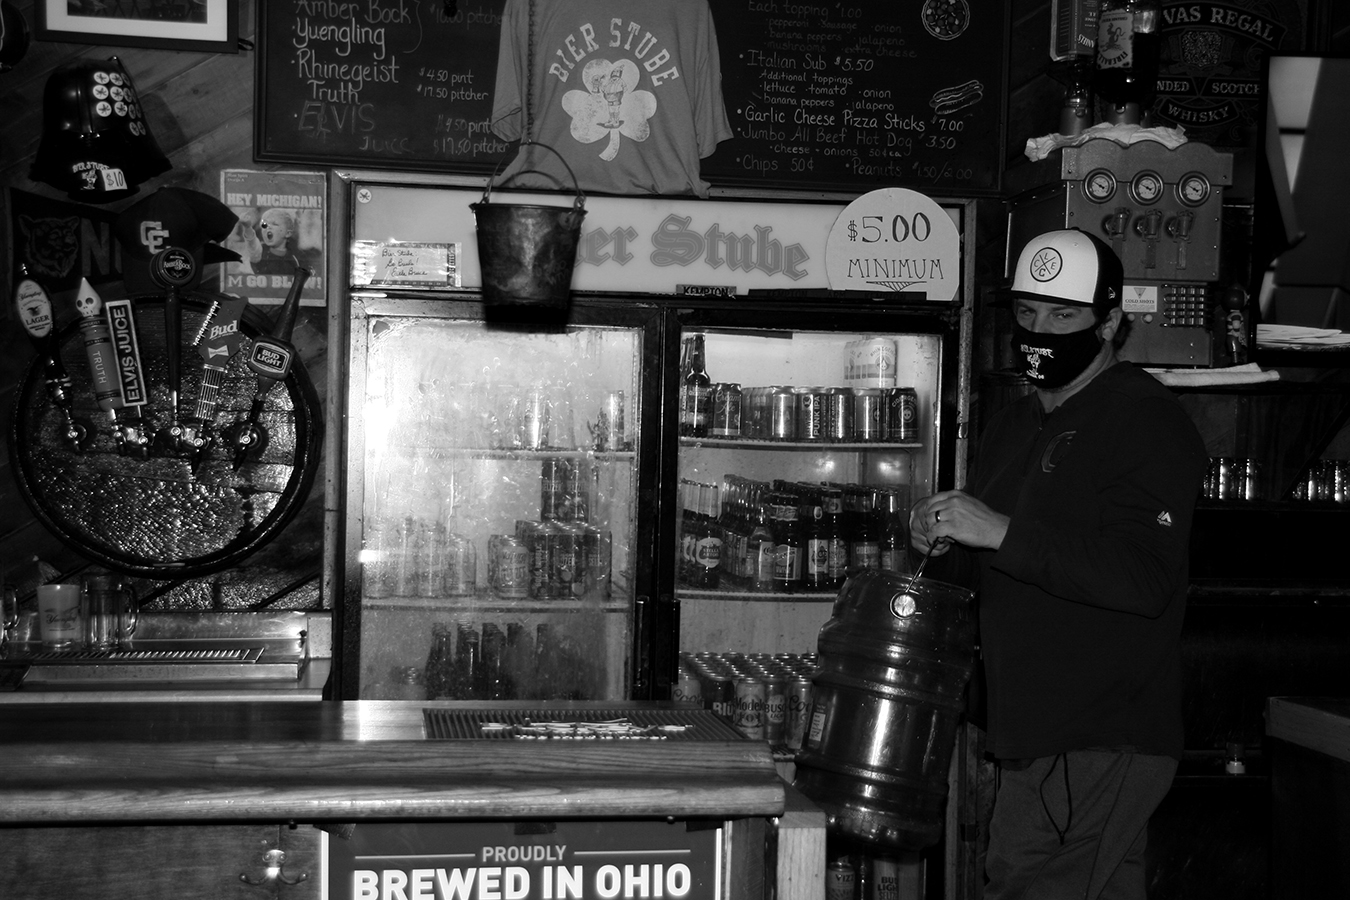 A black-and-white photo of a person wearing a mask and holding a keg behind the Bier Stube bar